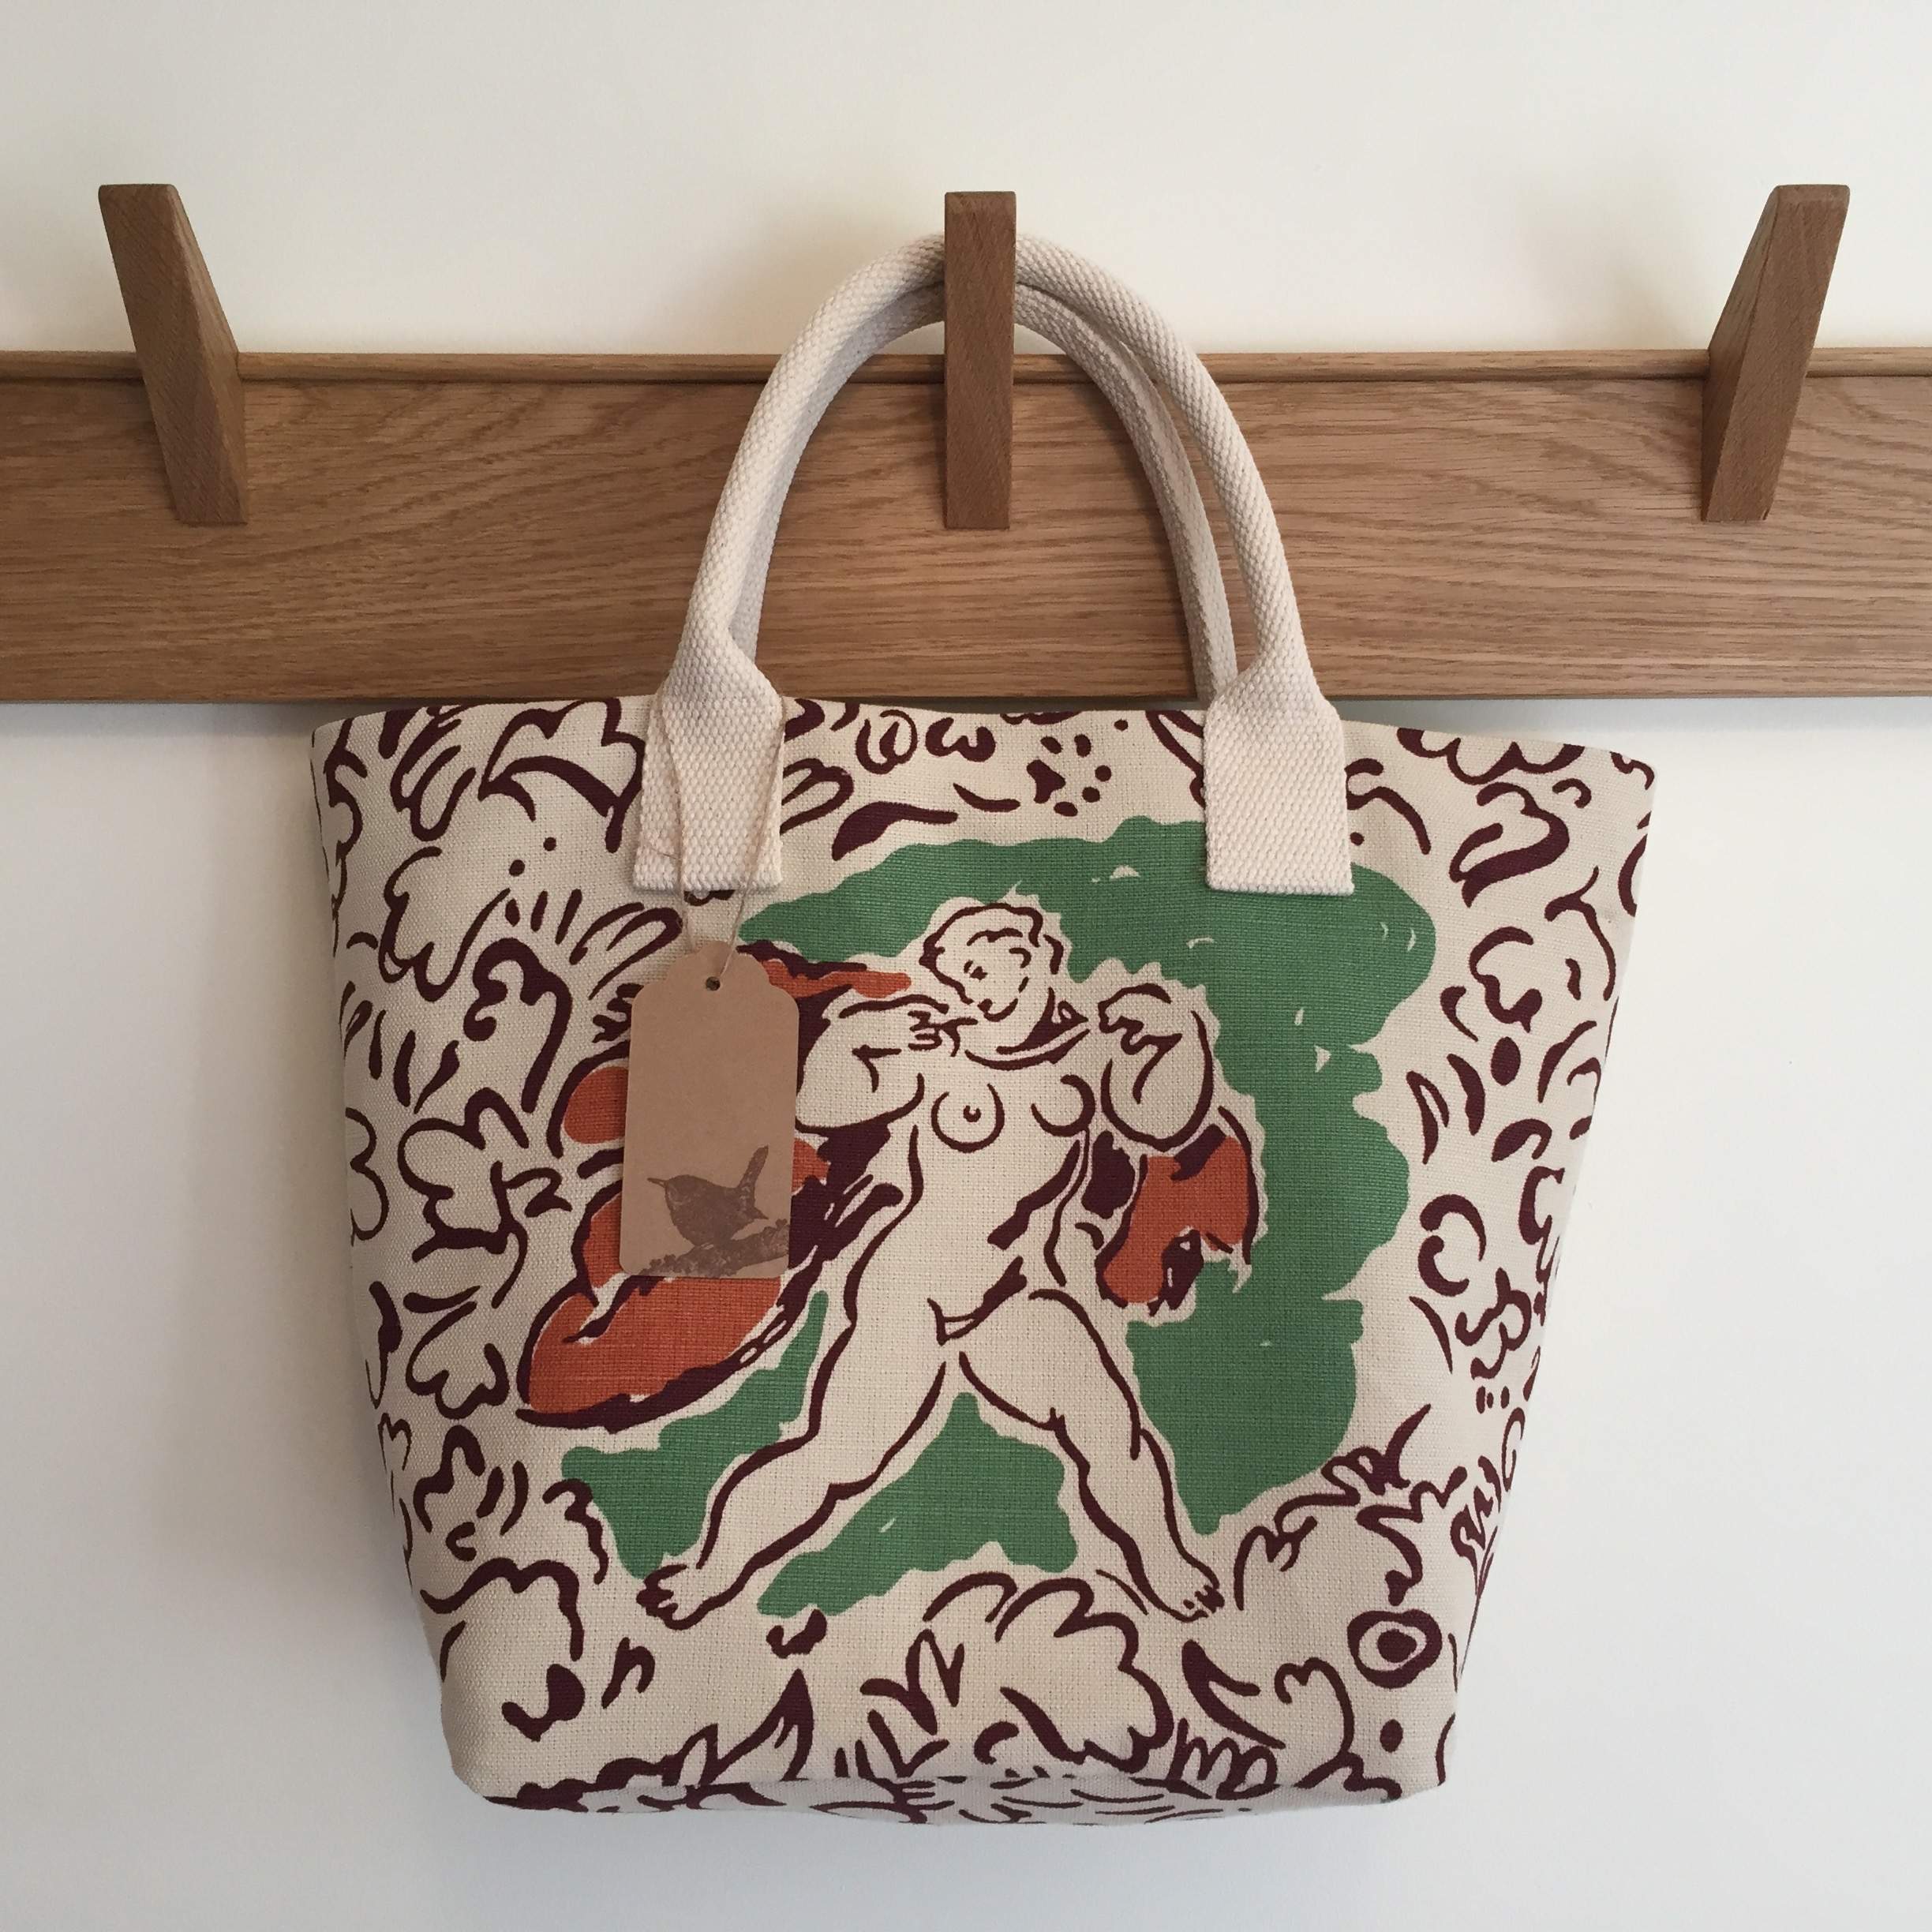 West Wind Tote